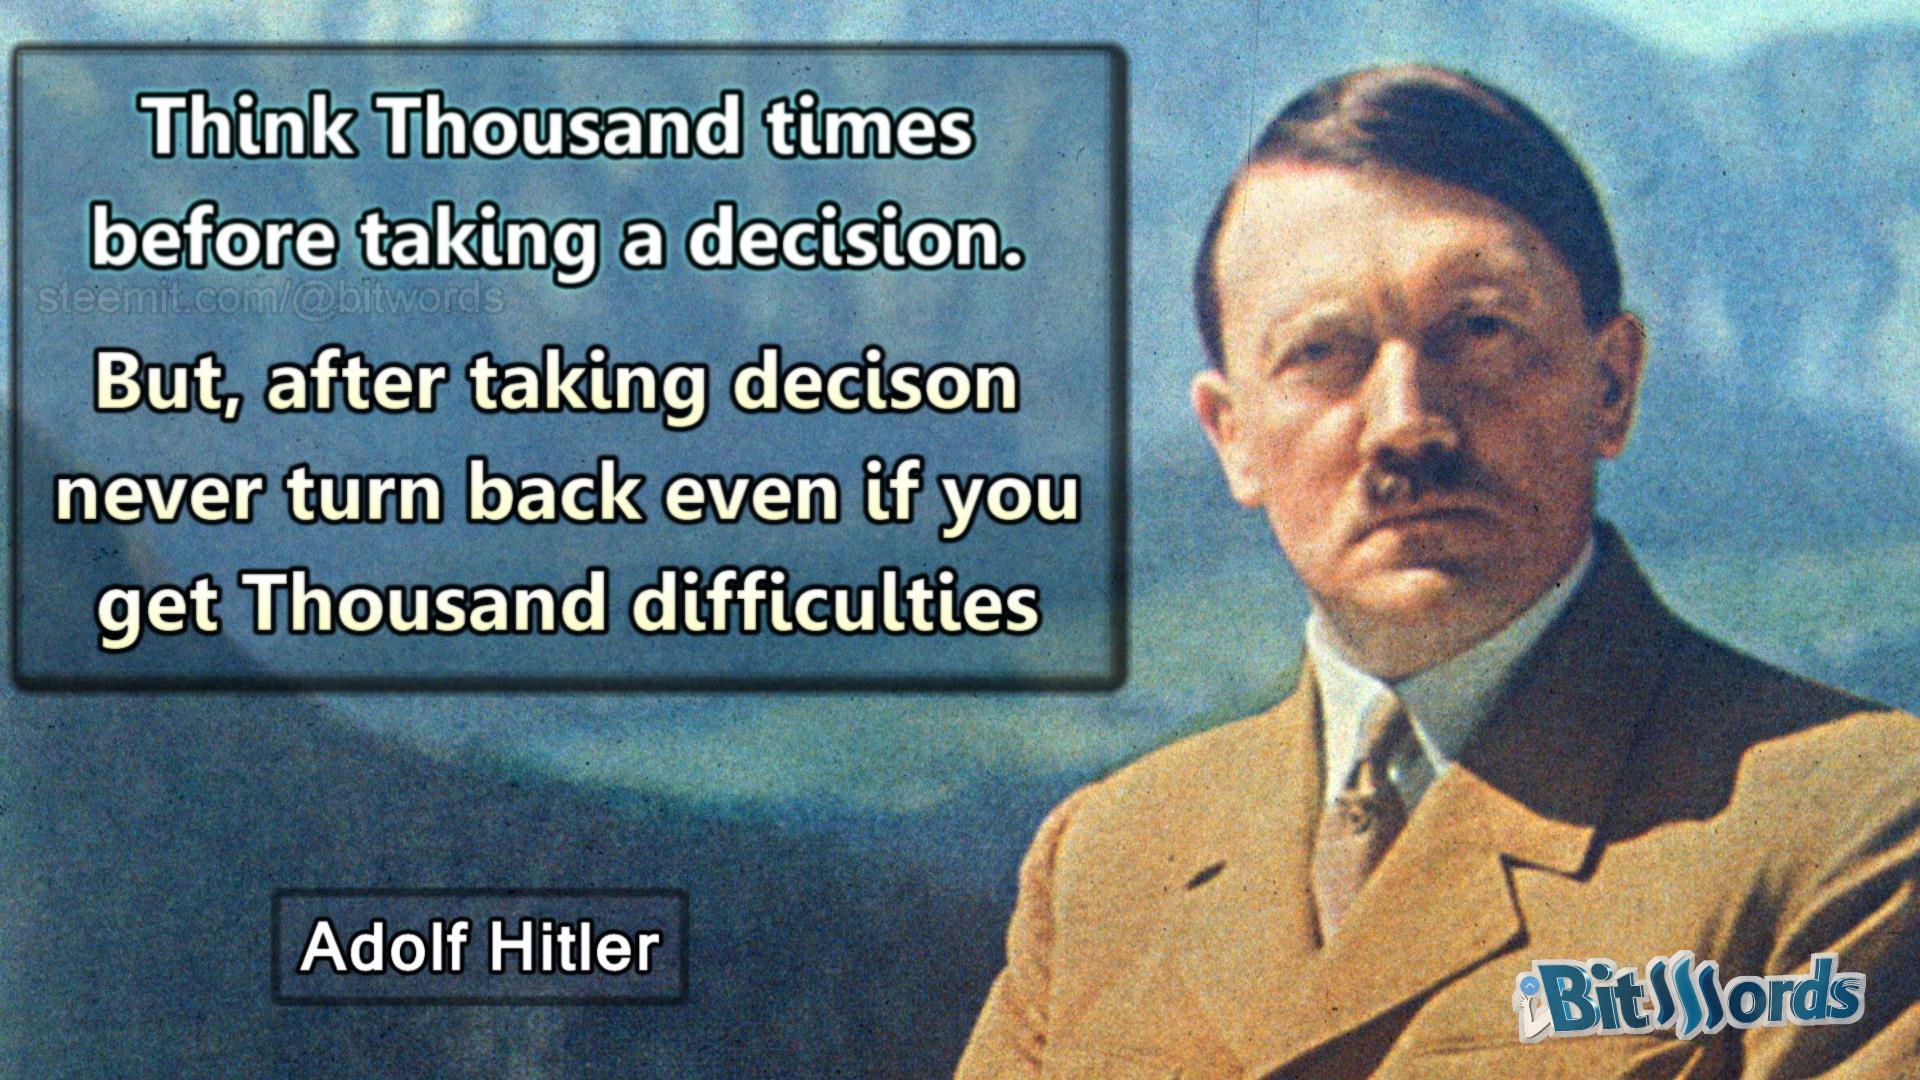 bitwords steemit quote of the dai adolf hitler think thousand times before taking decisions but after taking decision never turn back even if you ger thousand difficulties.jpg